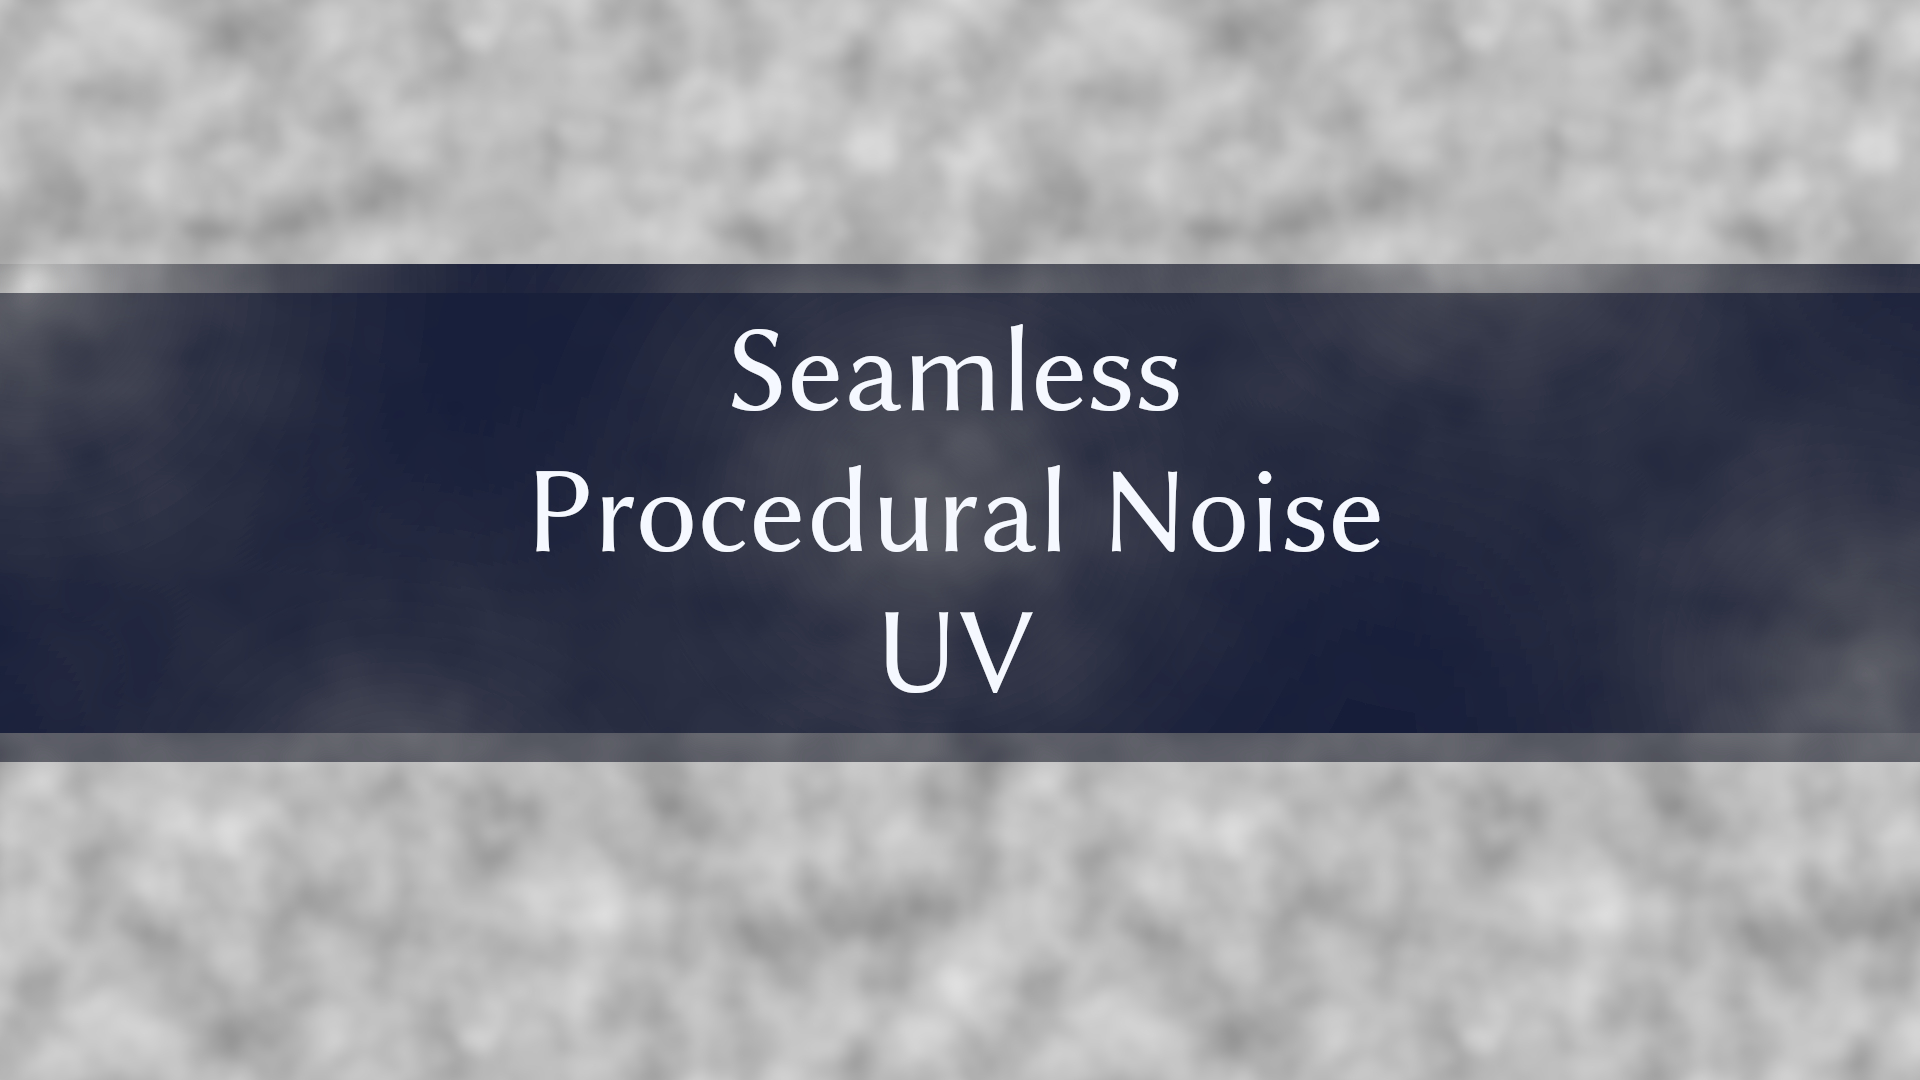 Seamless Procedural Noise UV preview image 1